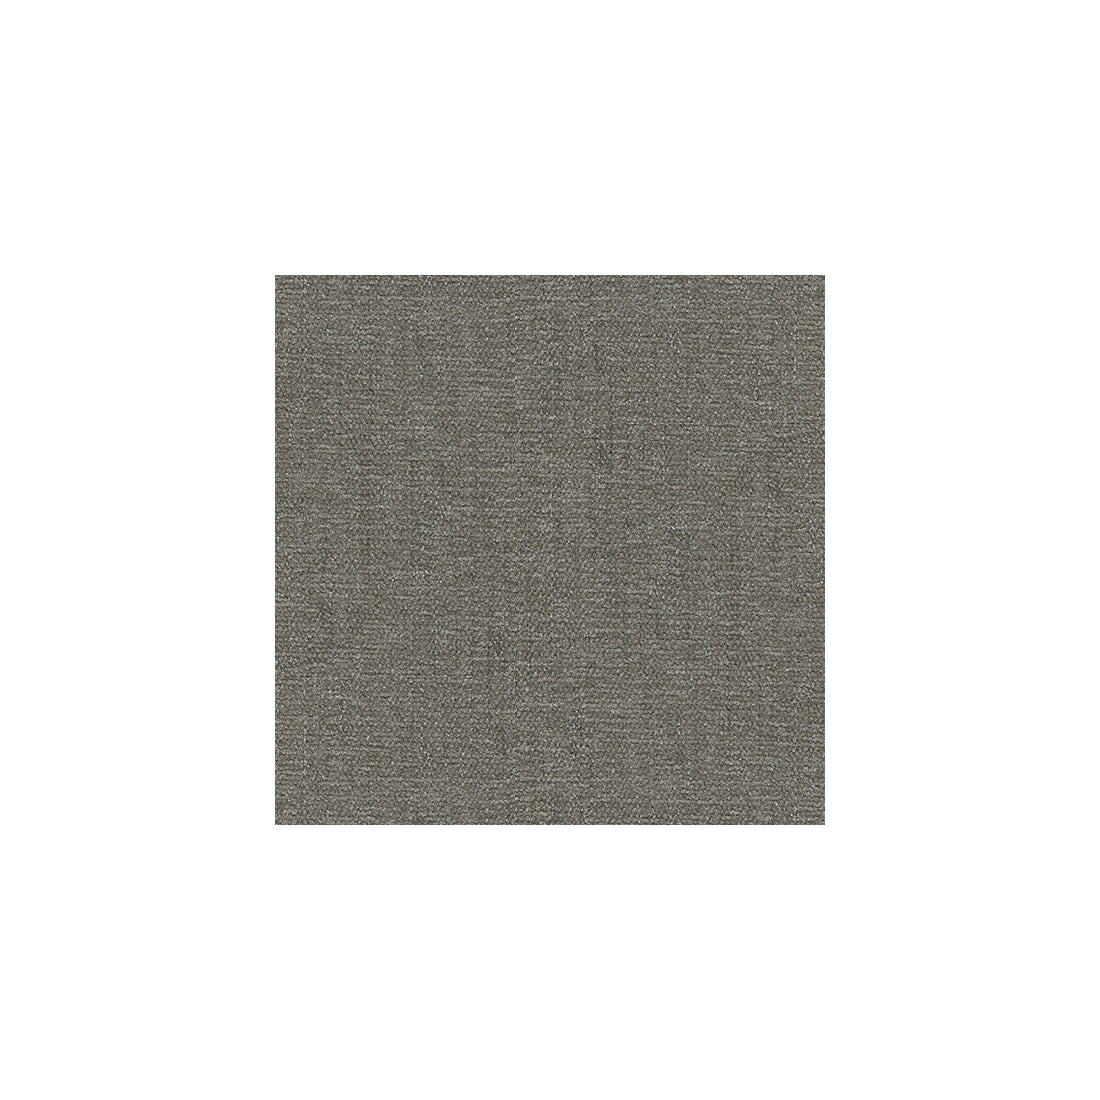 Kravet Contract fabric in 32148-11 color - pattern 32148.11.0 - by Kravet Contract